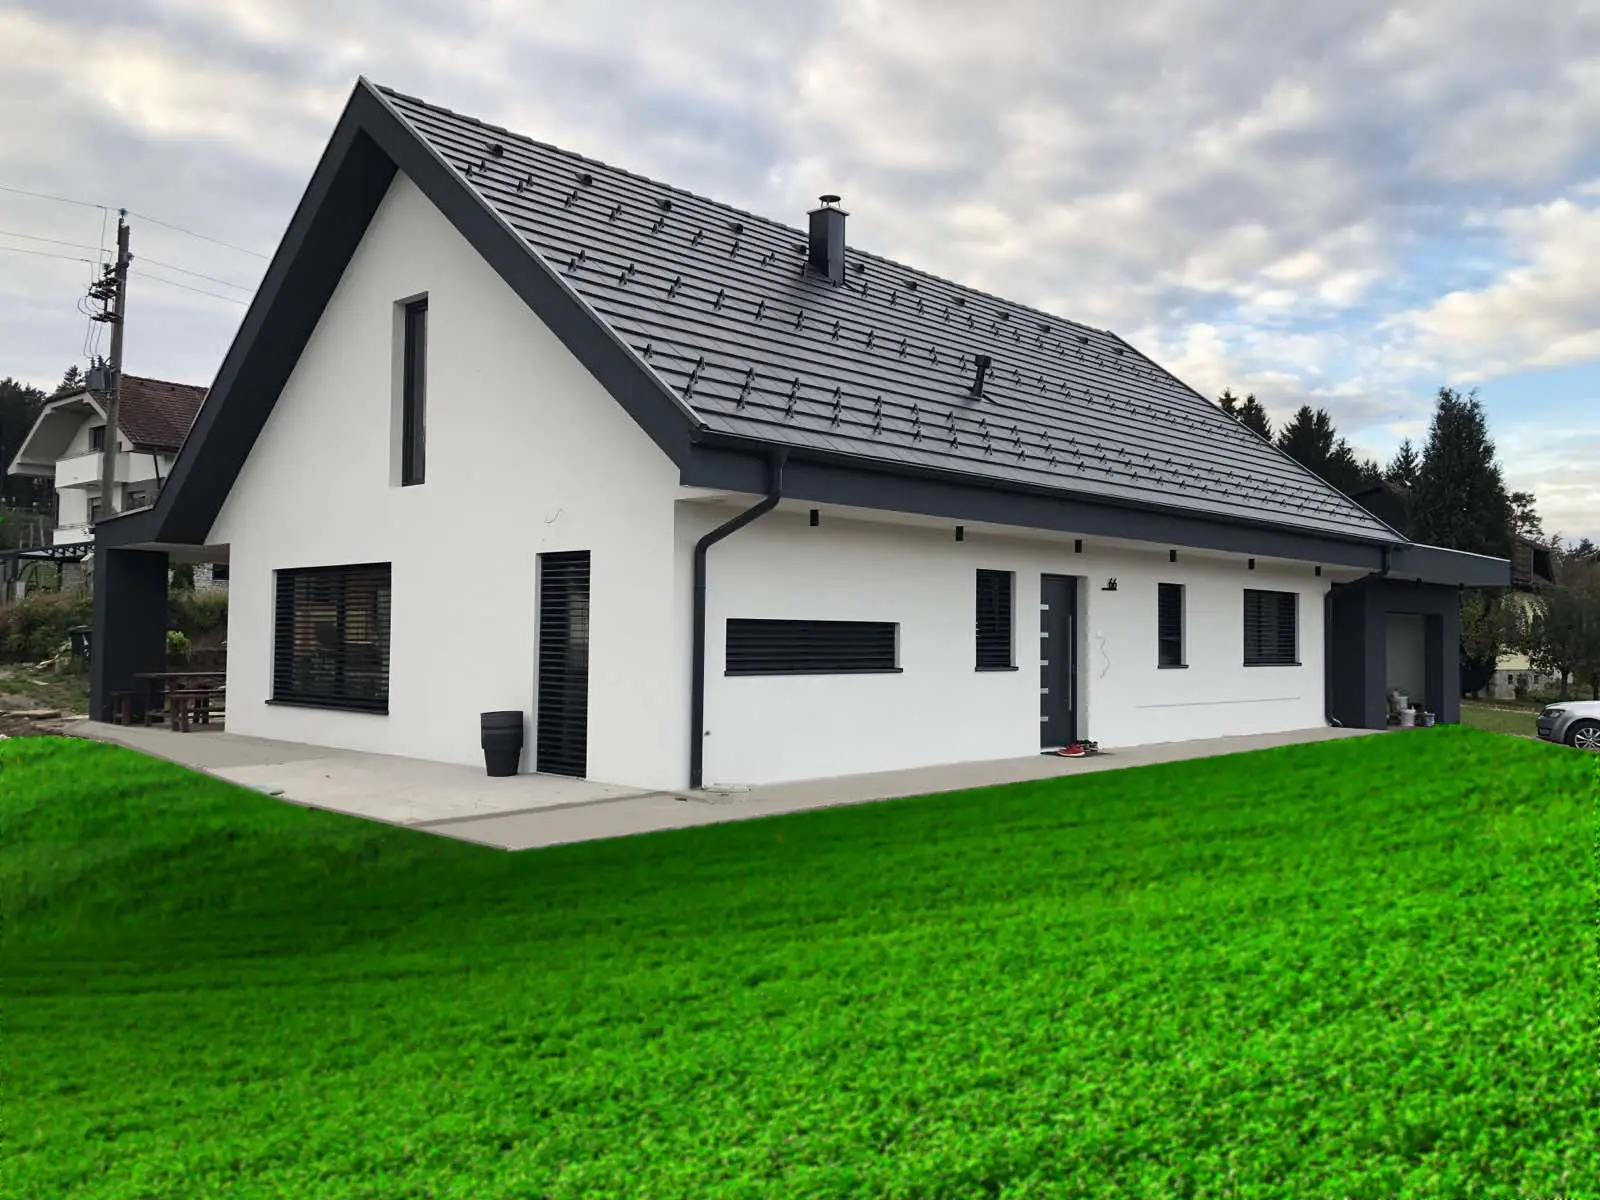 The price of a prefabricated house